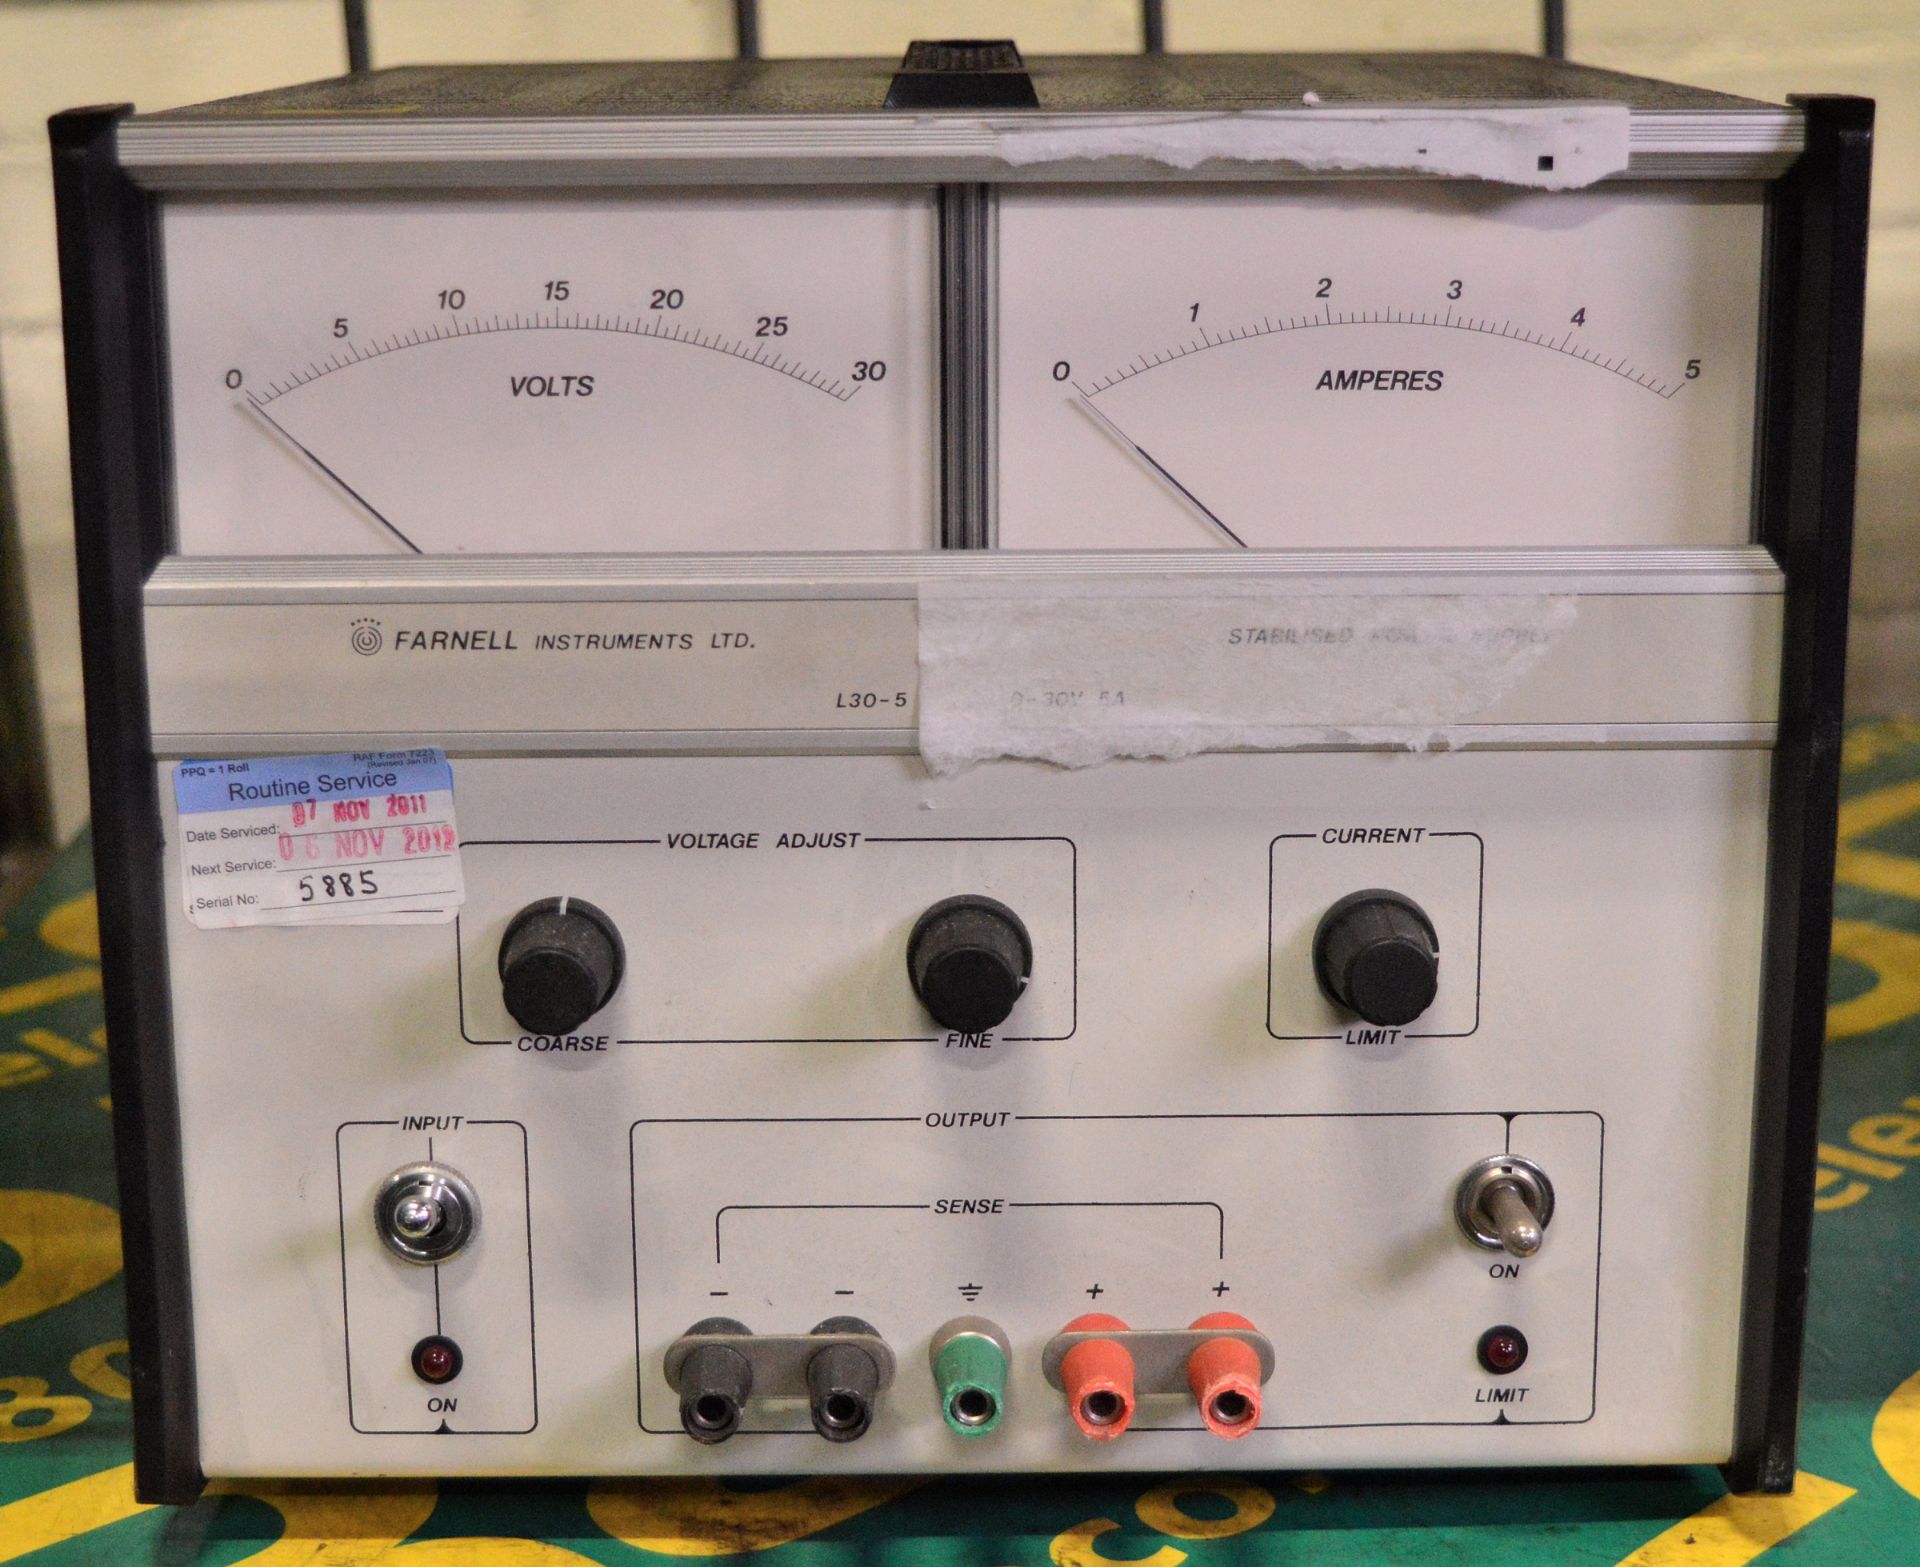 Farnell L30-5 0-30V 5A Stabilised Power Supply Unit - Image 2 of 2